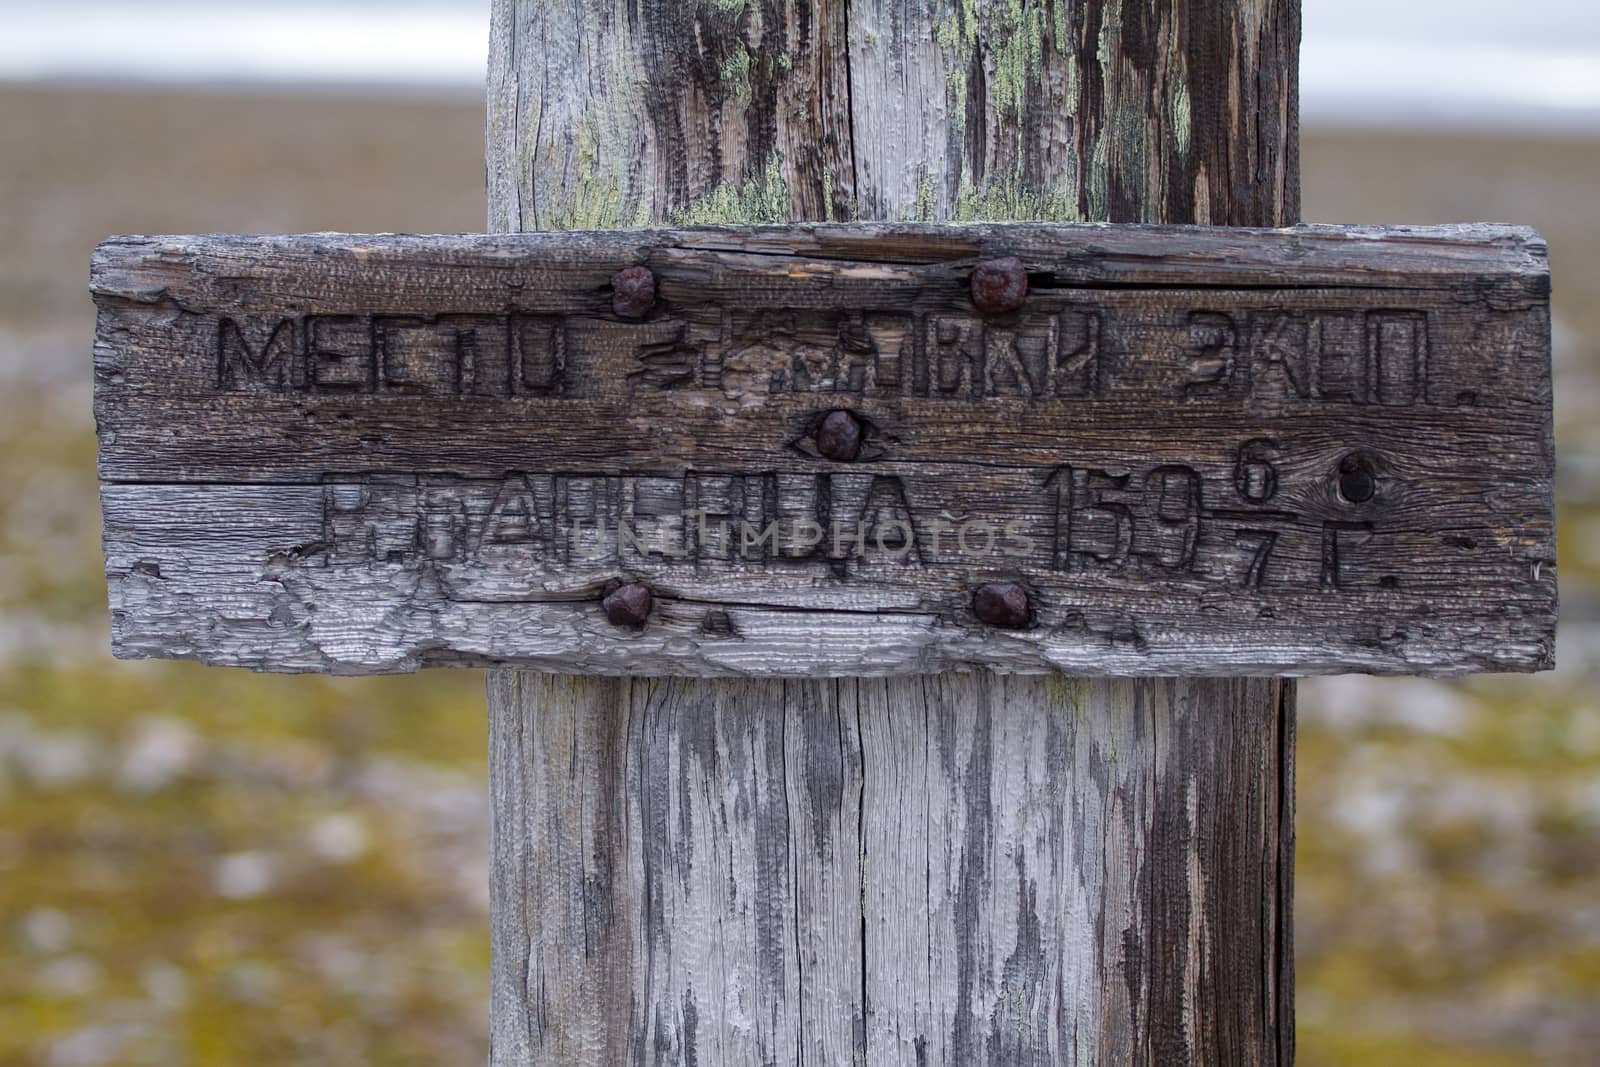  cross and inscription on wintering expedition of Willem Barents sea on island of Novaya Zemlya. Old nails. inscription in Cyrillic.